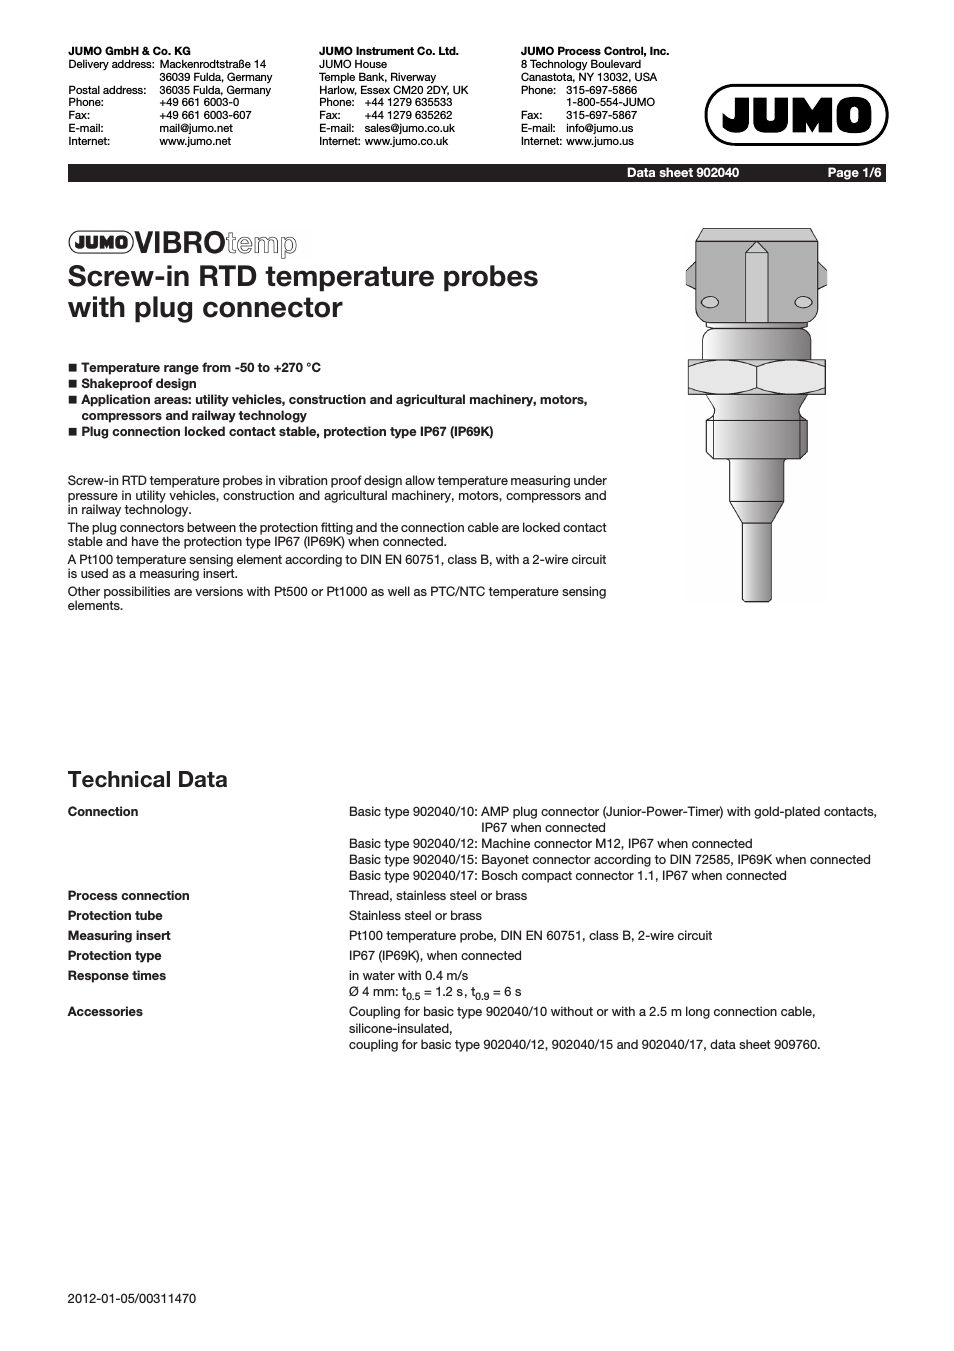 902040 VIBROtemp Screw-In RTD Temperature Probe with Plug Connector Data Sheet